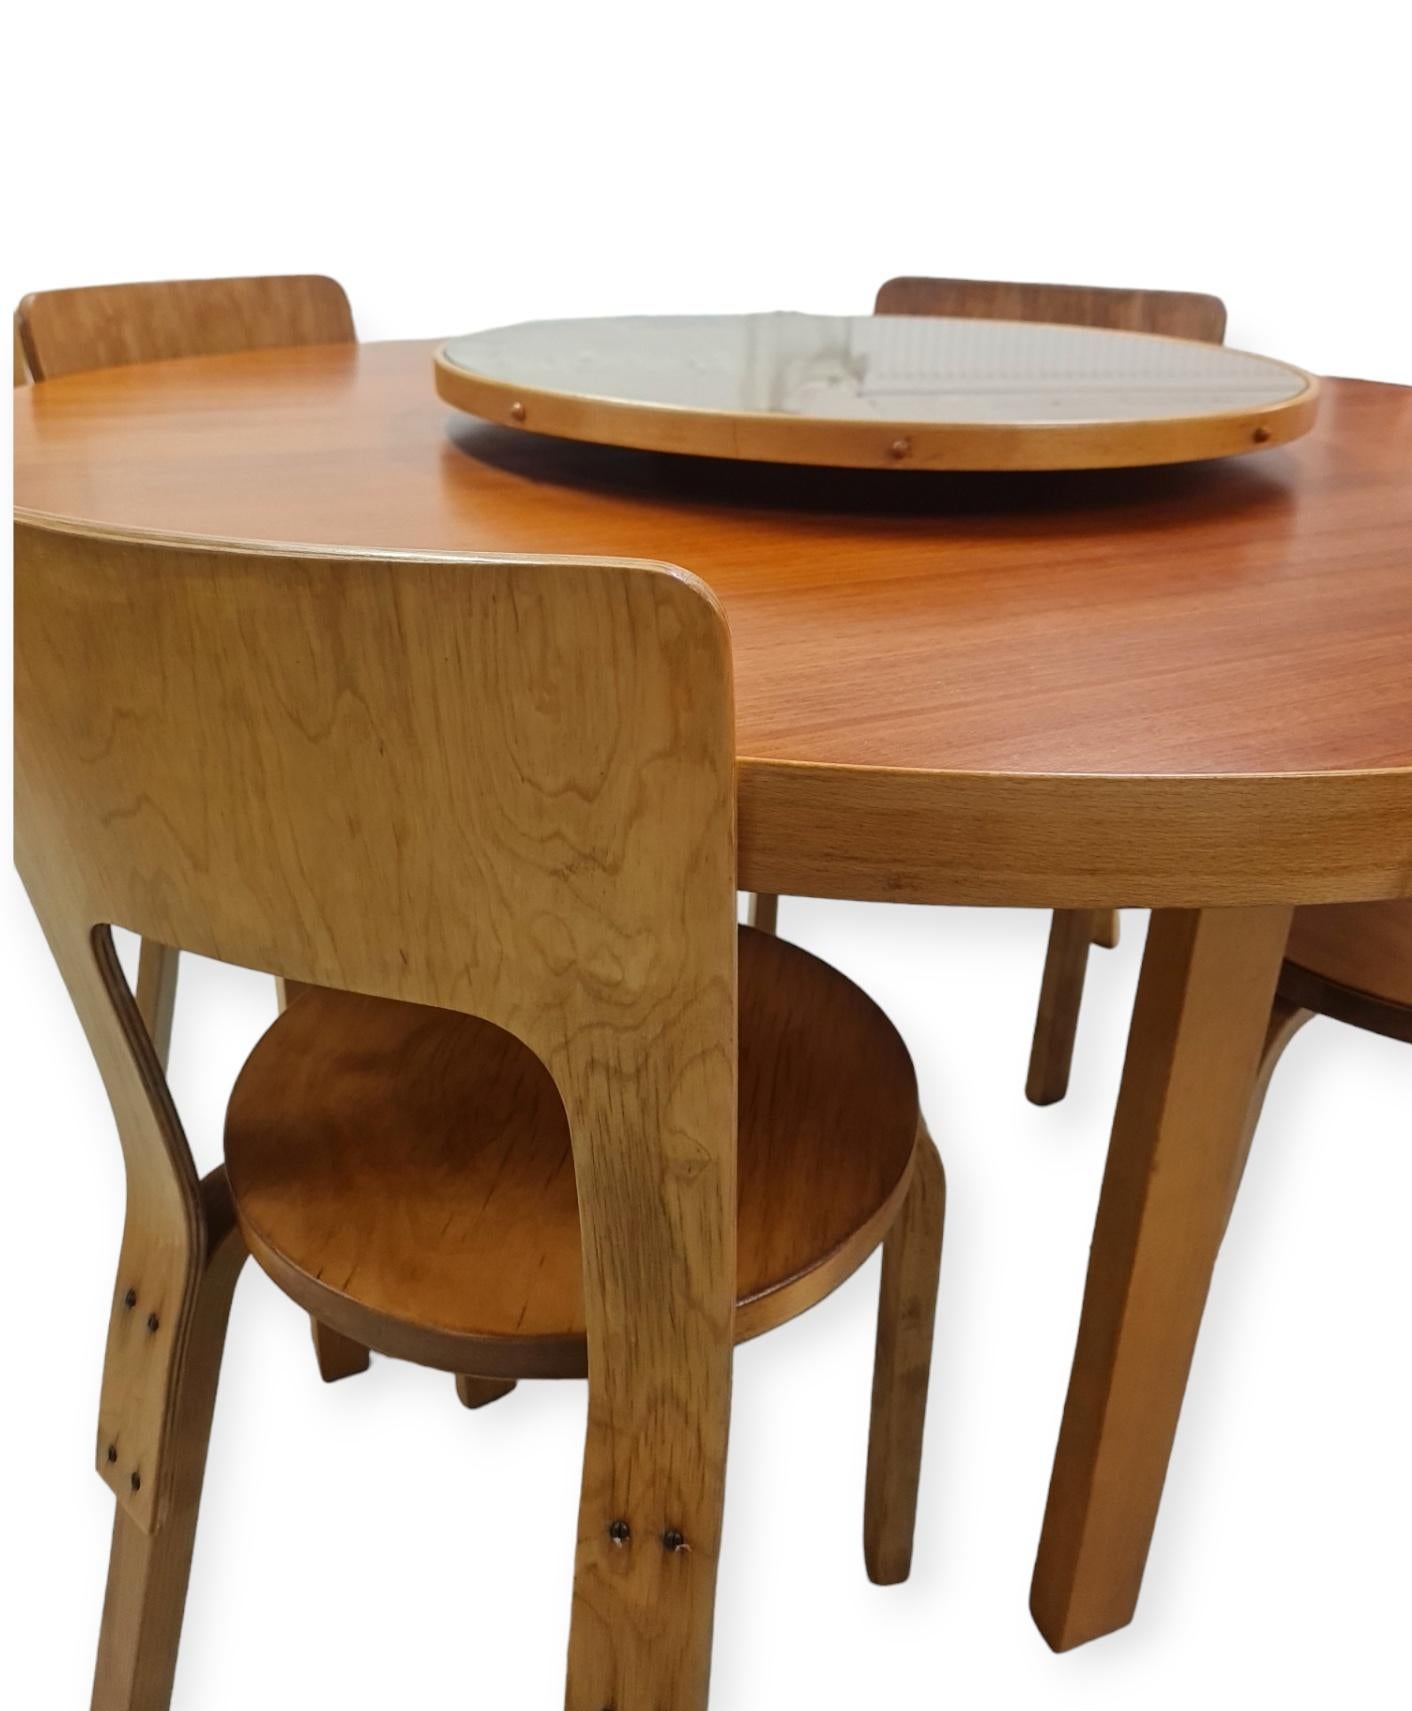 Alvar Aalto Dinning Set with Lazy Susan and 6 Model 66 chairs, 1940s For Sale 3